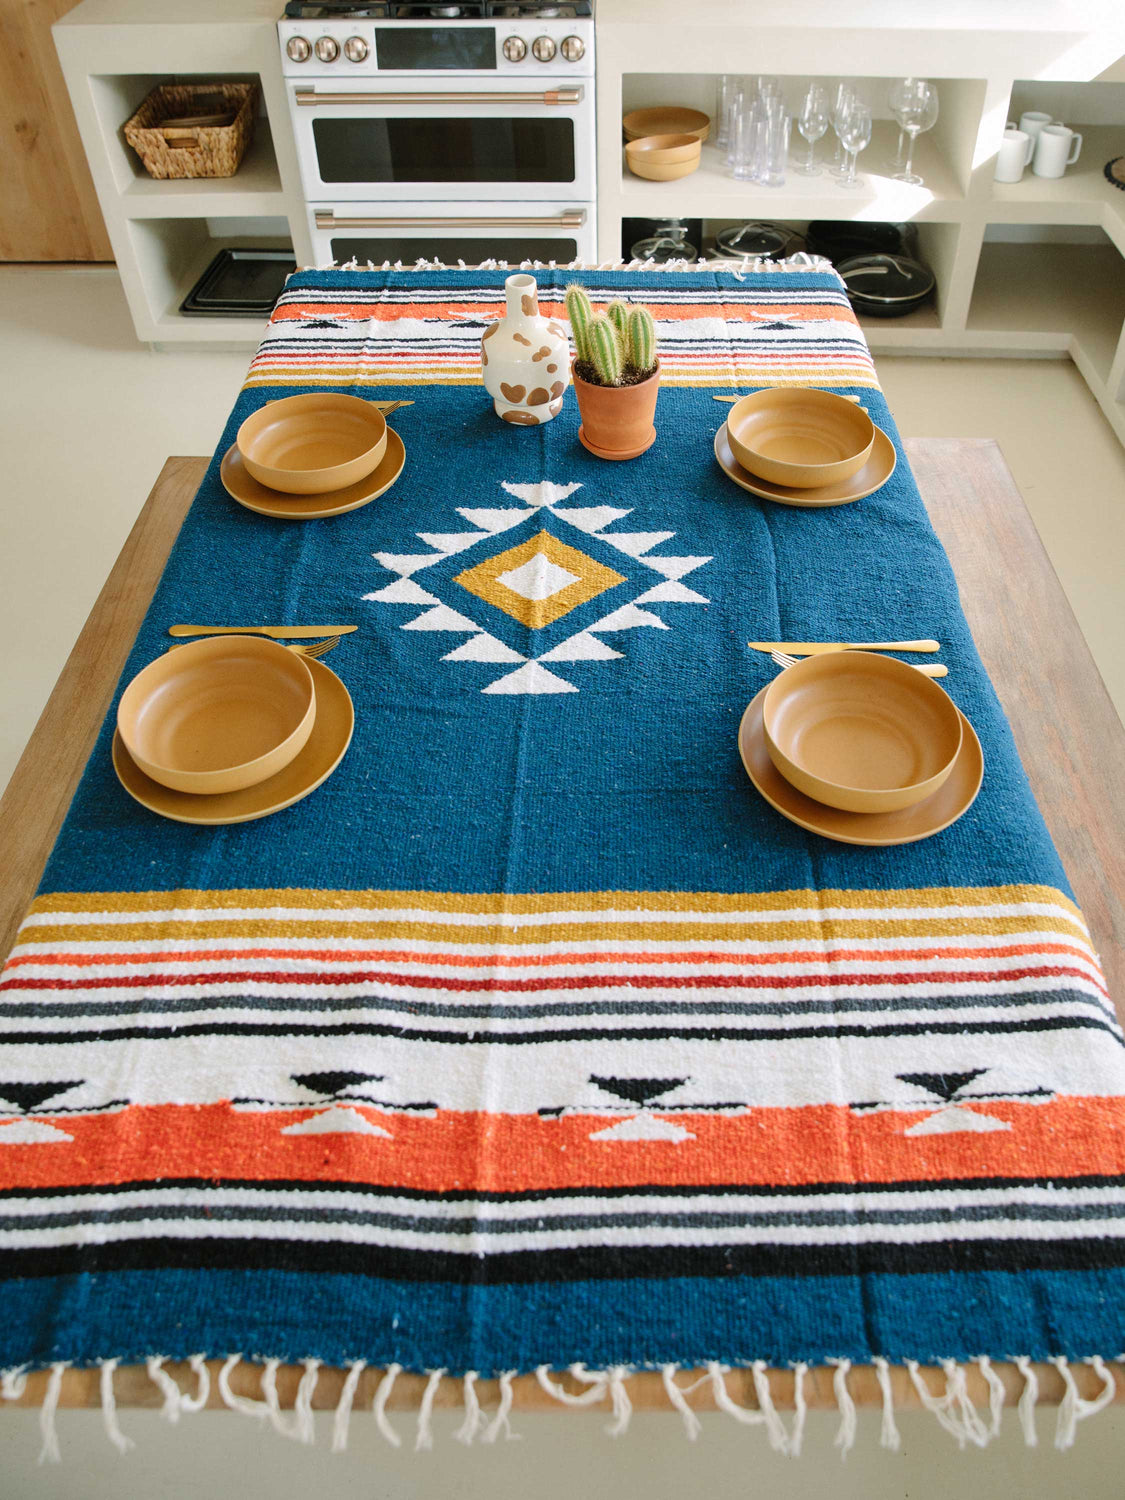 Navy blue Mexican blanket styled as a table cloth in desert kitchen.